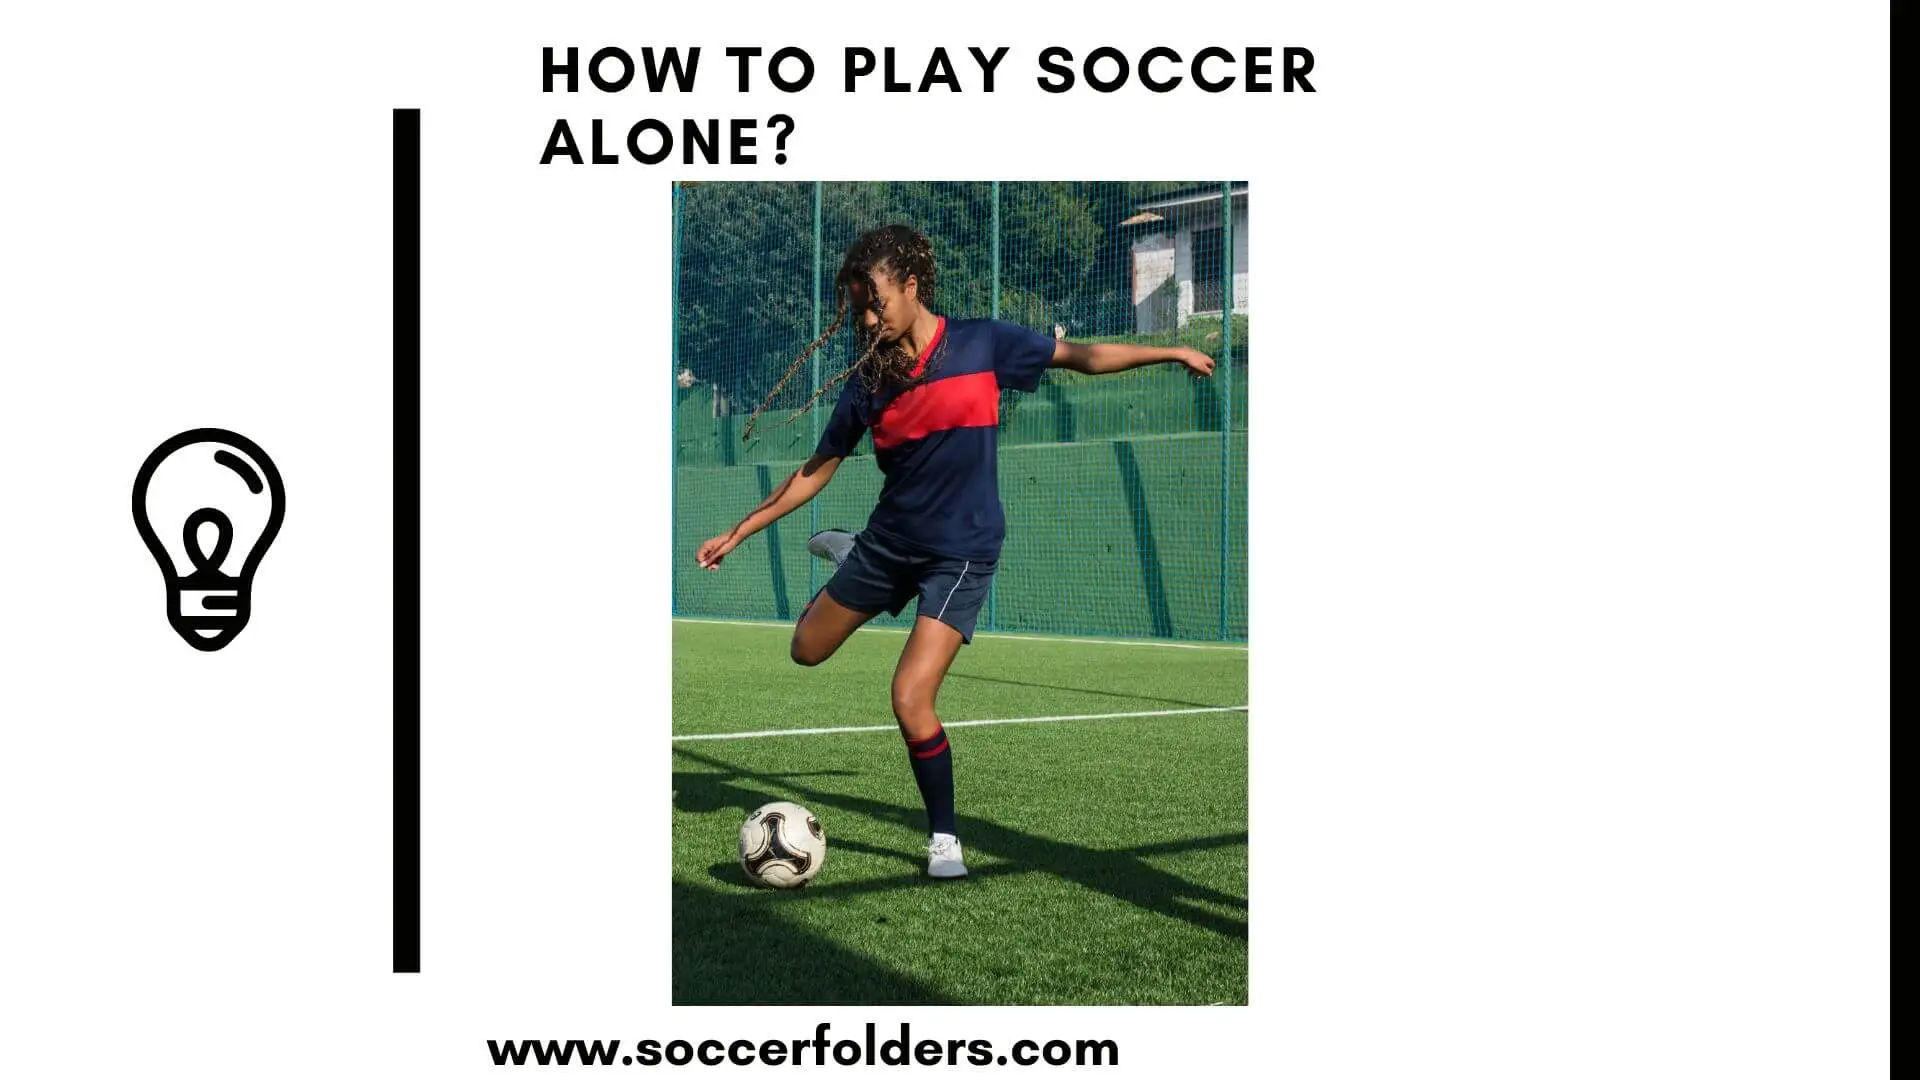 How to play soccer alone - Featured Image